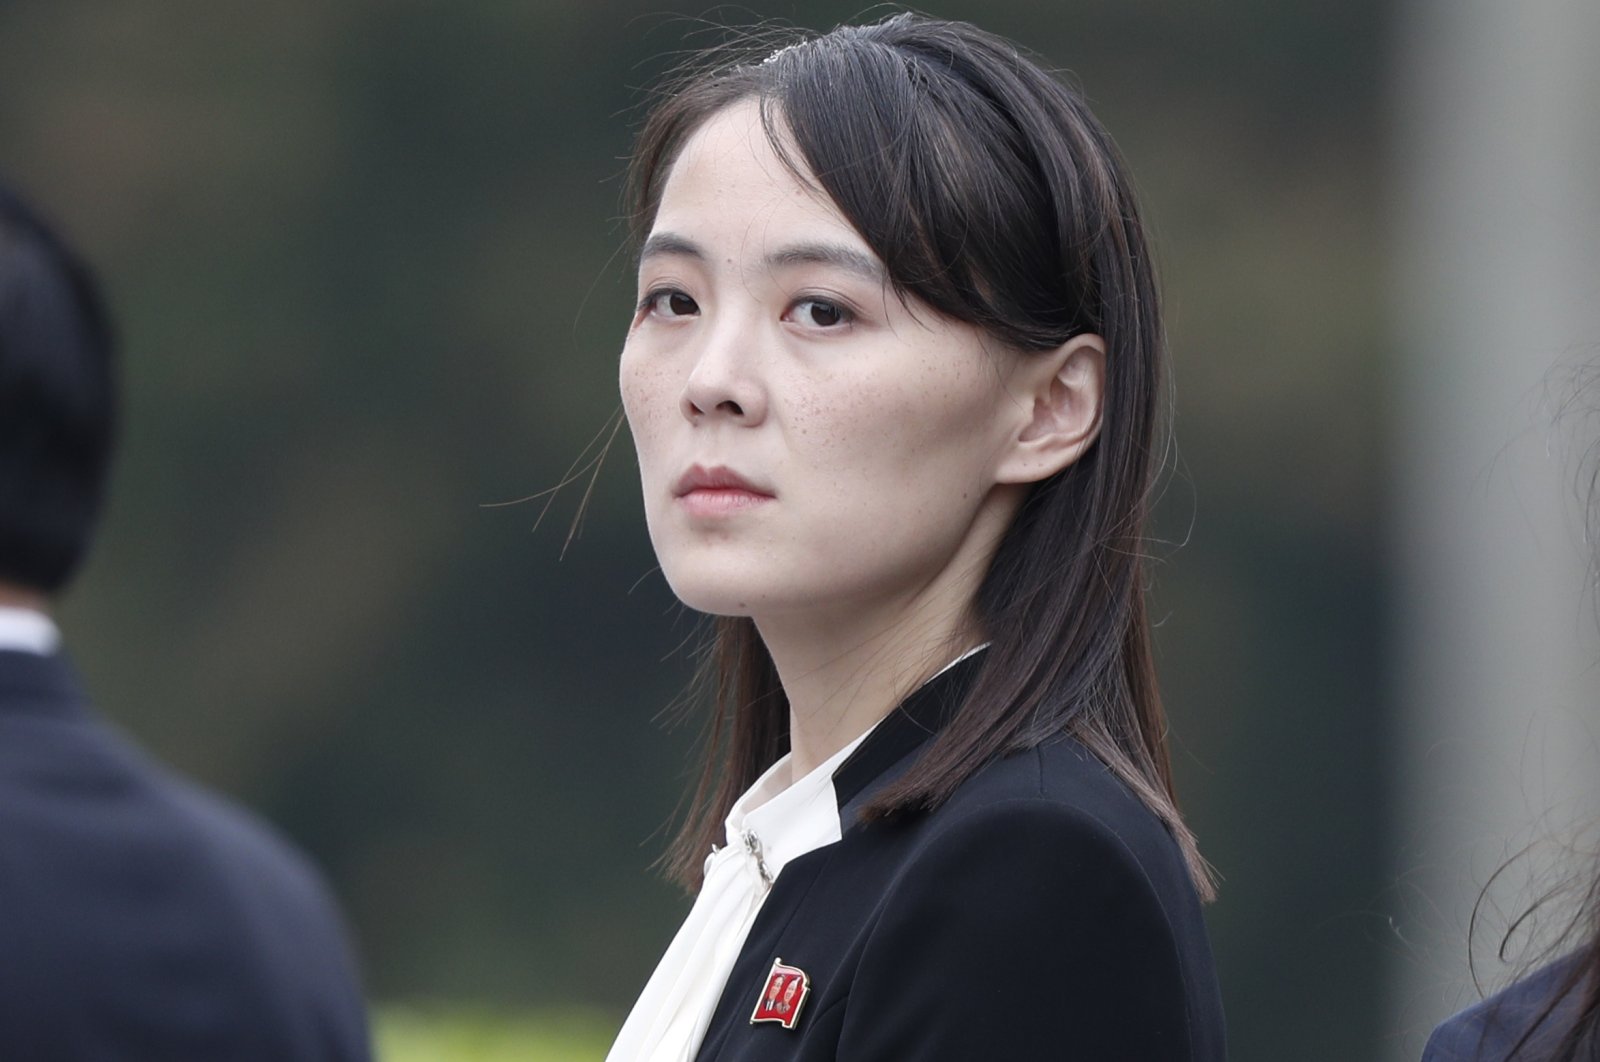 Kim Yo Jong, sister of North Korean leader Kim Jong Un, attends a wreath laying ceremony at the Ho Chi Minh Mausoleum, Hanoi, Vietnam, March 2, 2019. (Getty Images Photo)